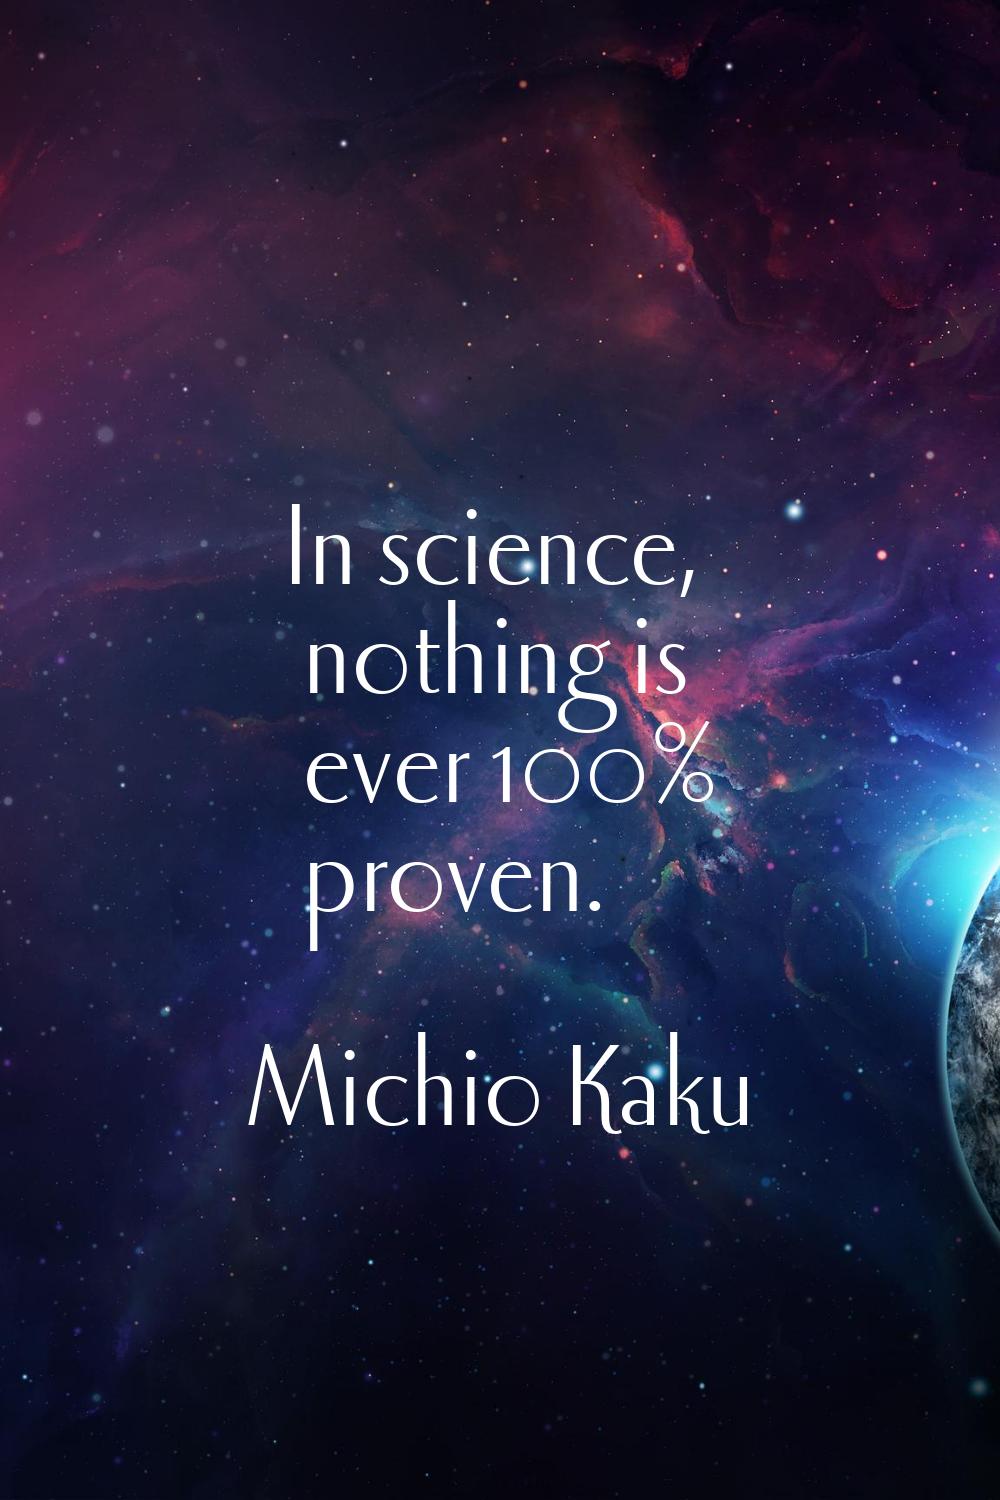 In science, nothing is ever 100% proven.